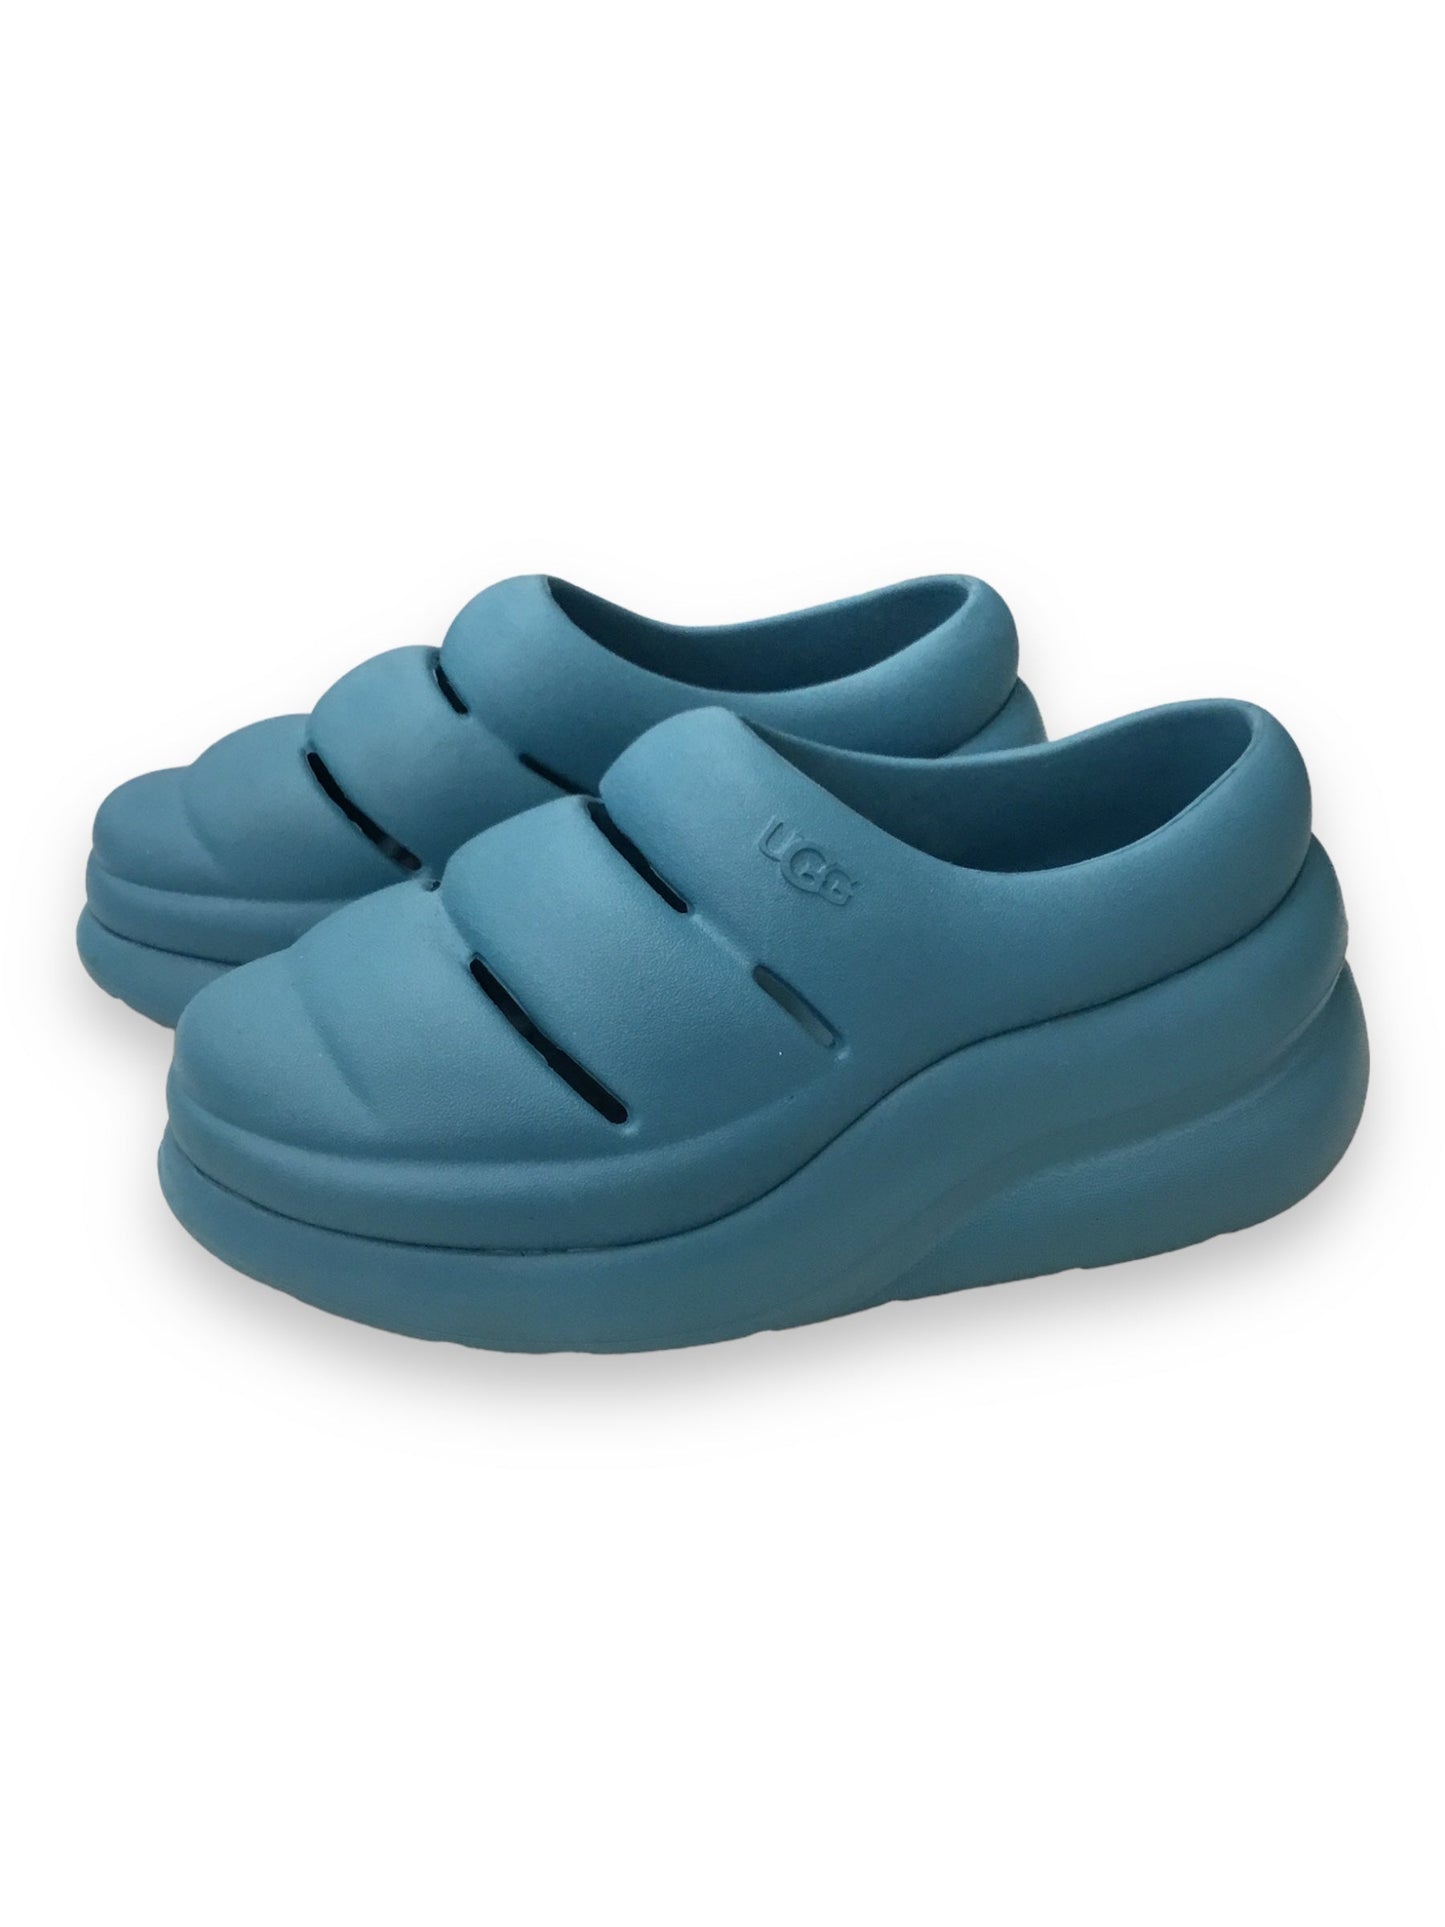 Blue Slippers Ugg, Size 8